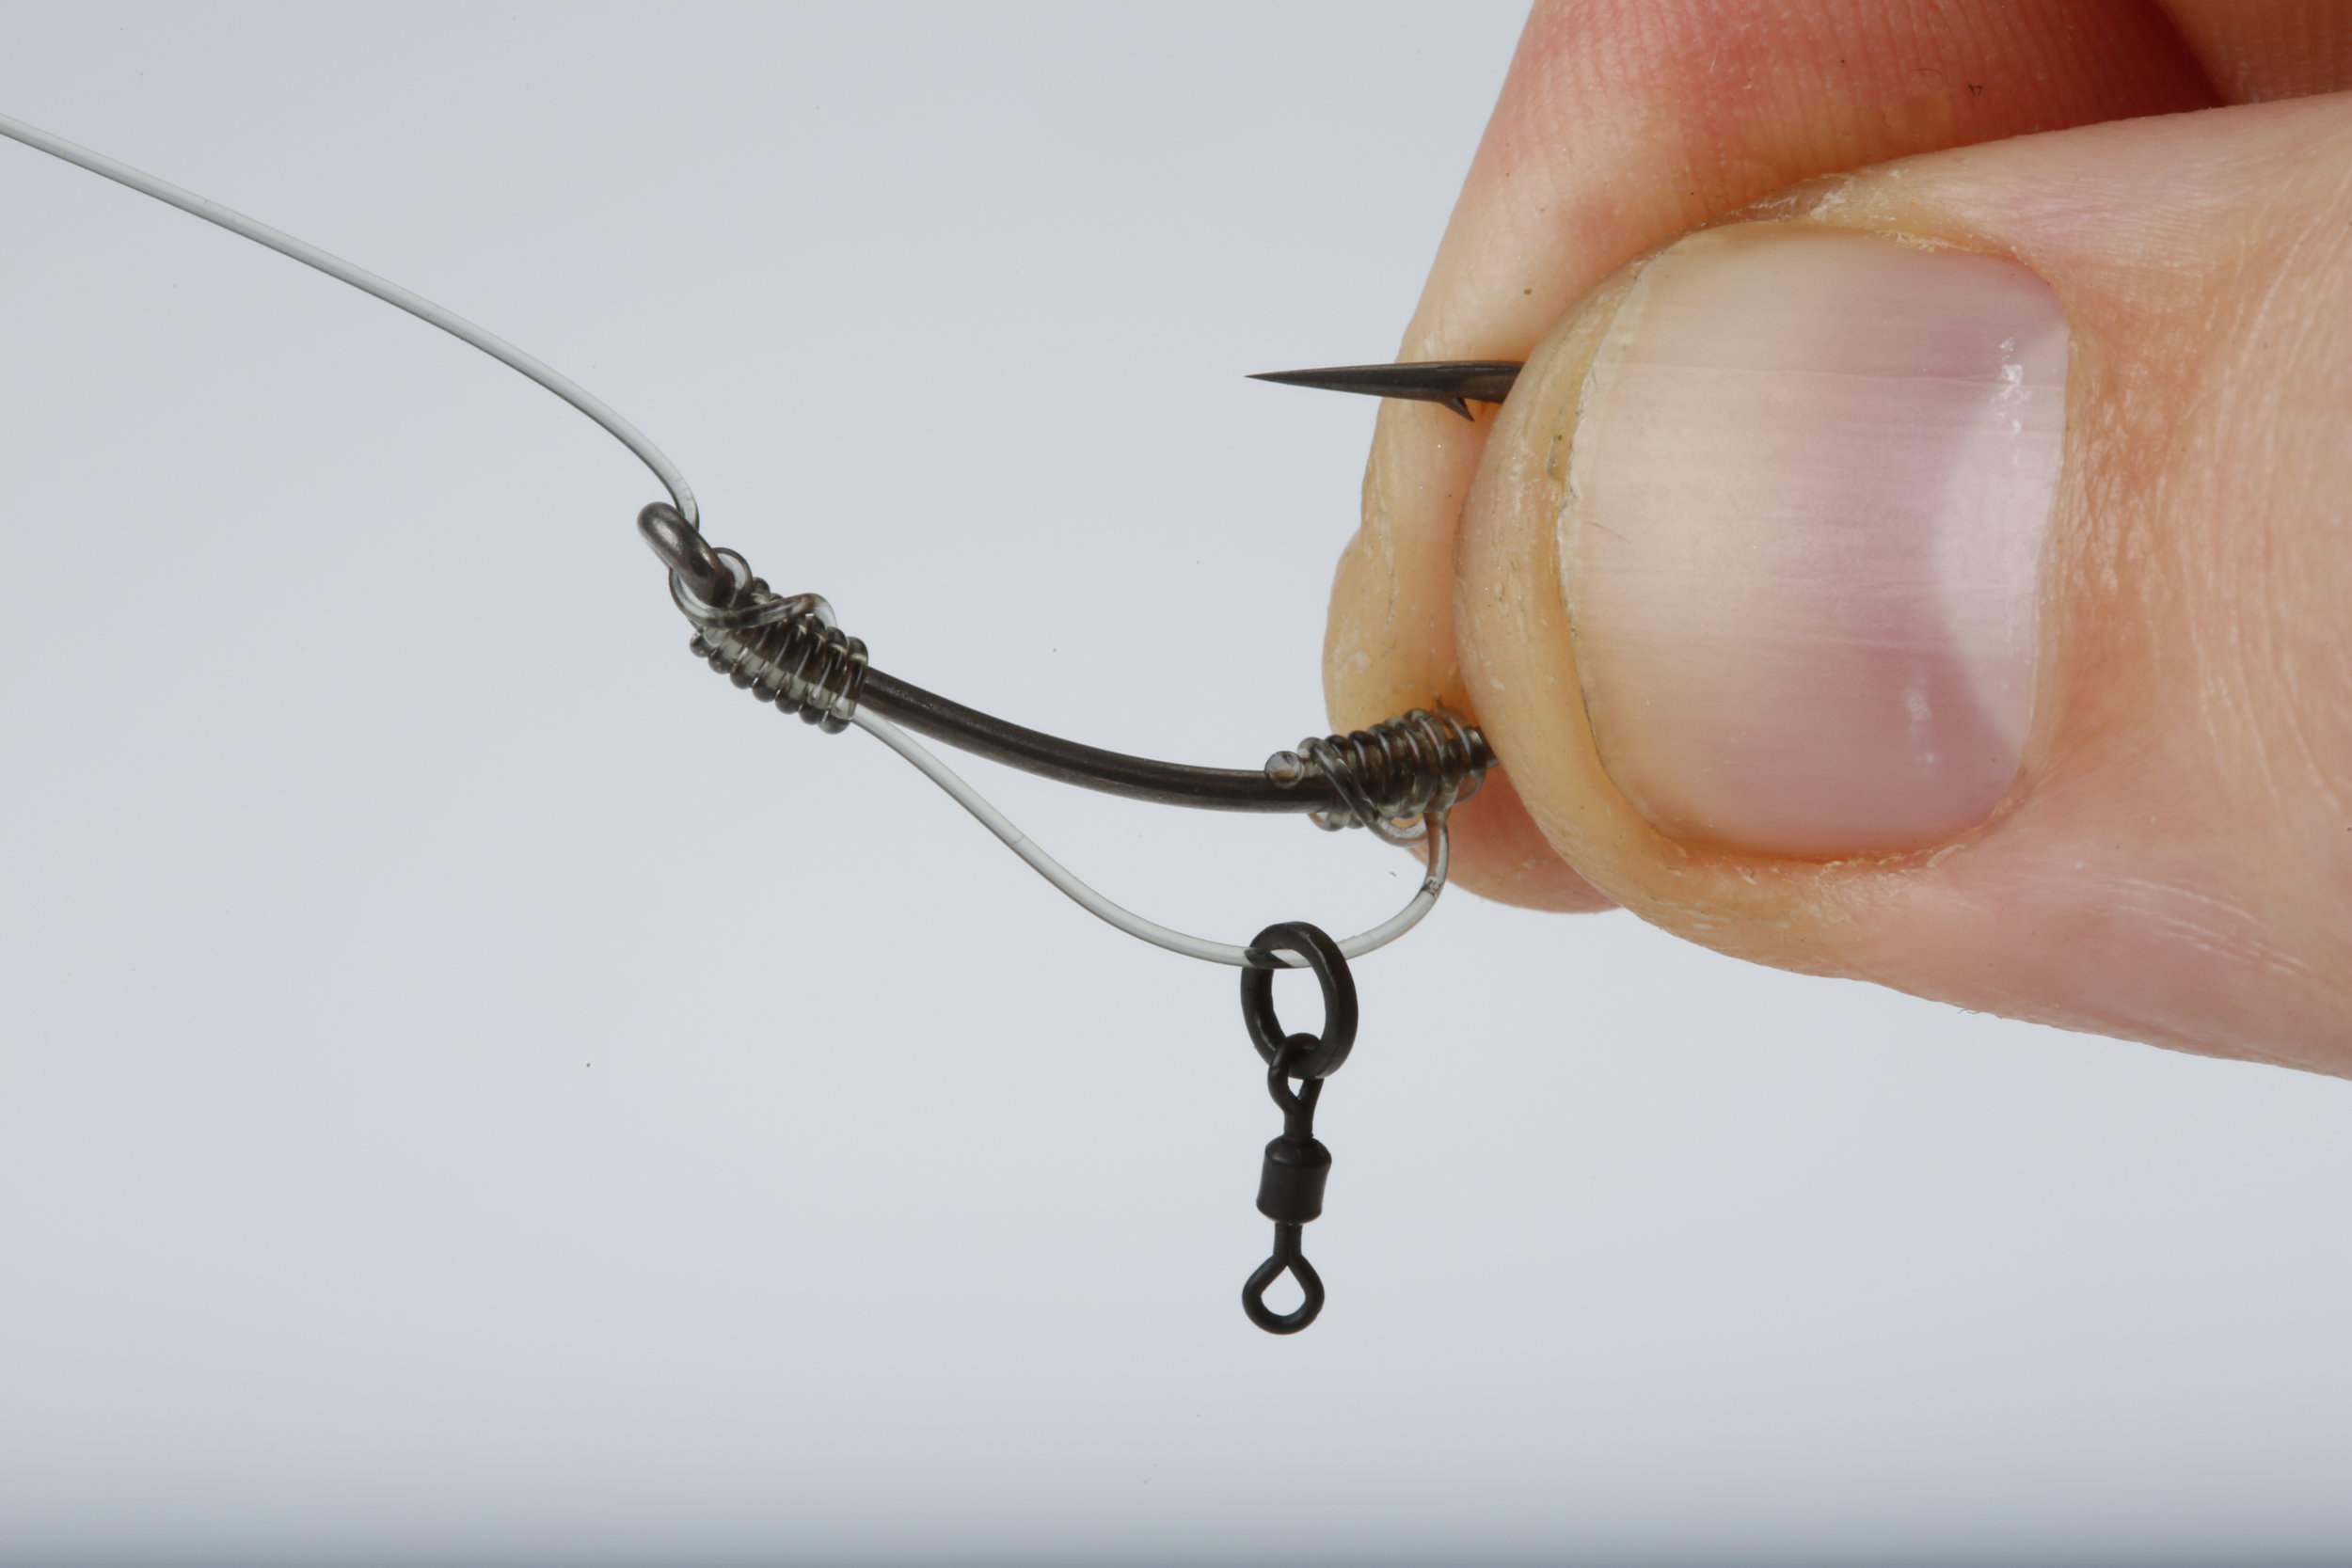 korda 20 lb IQ D RIG using the best materials various sizes  